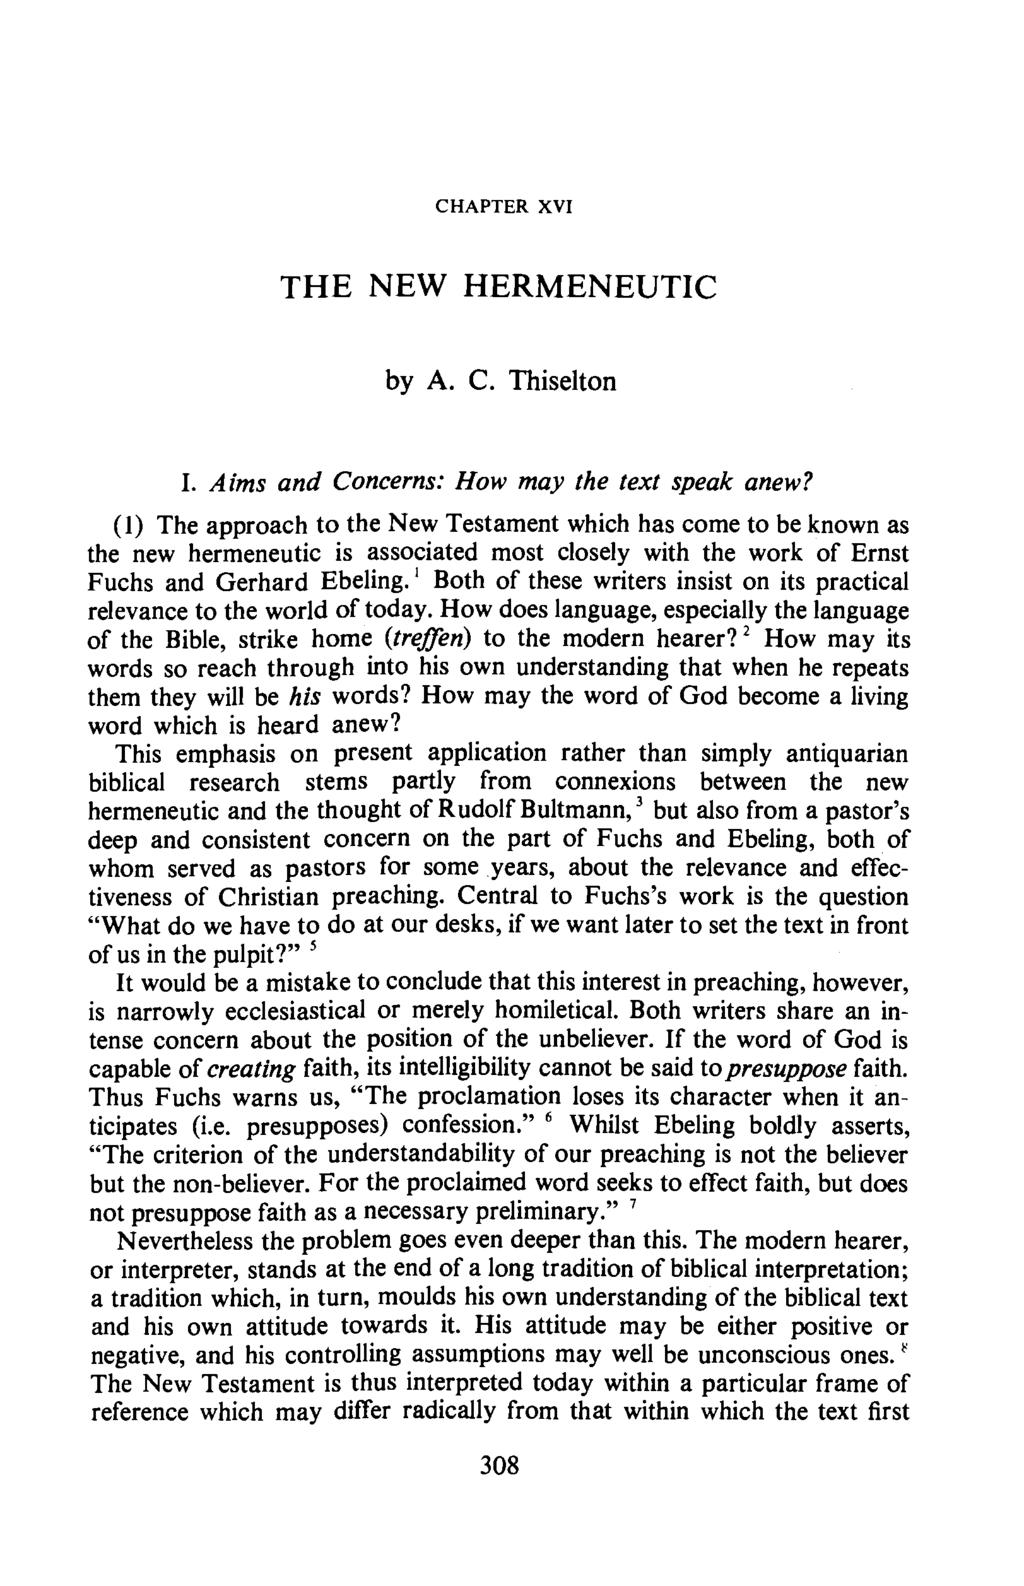 CHAPTER XVI THE NEW HERMENEUTIC by A. C. Thiselton I. Aims and Concerns: How may the text speak anew?